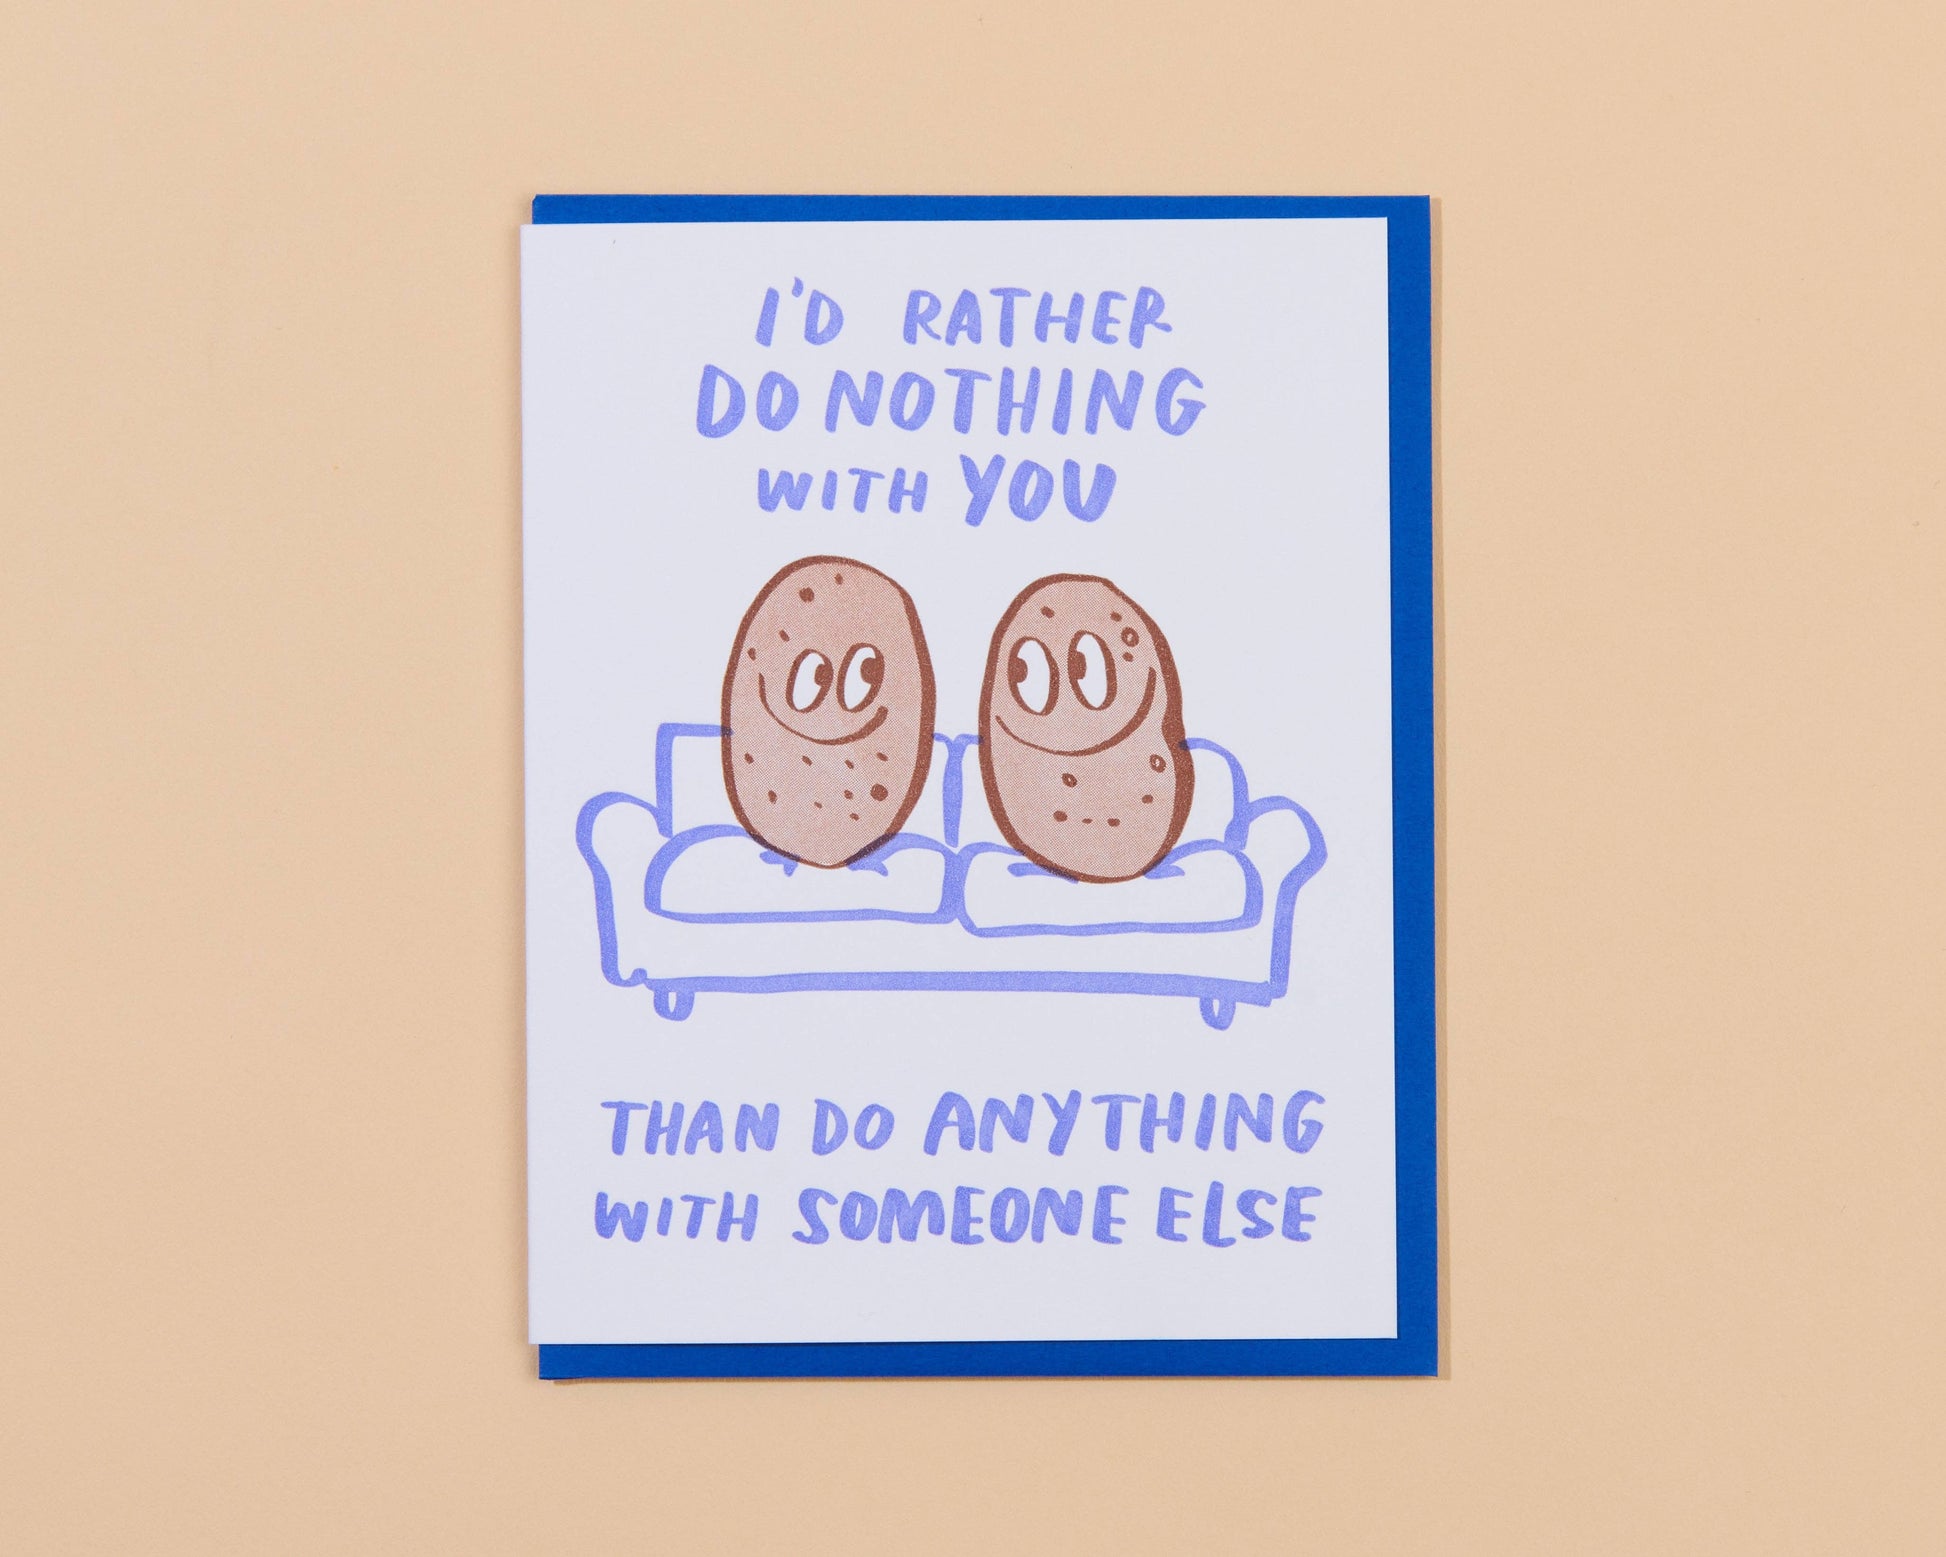 Greeting card that reads "I'd rather do nothing with you than do anything with someone else" with two potatoes on a couch